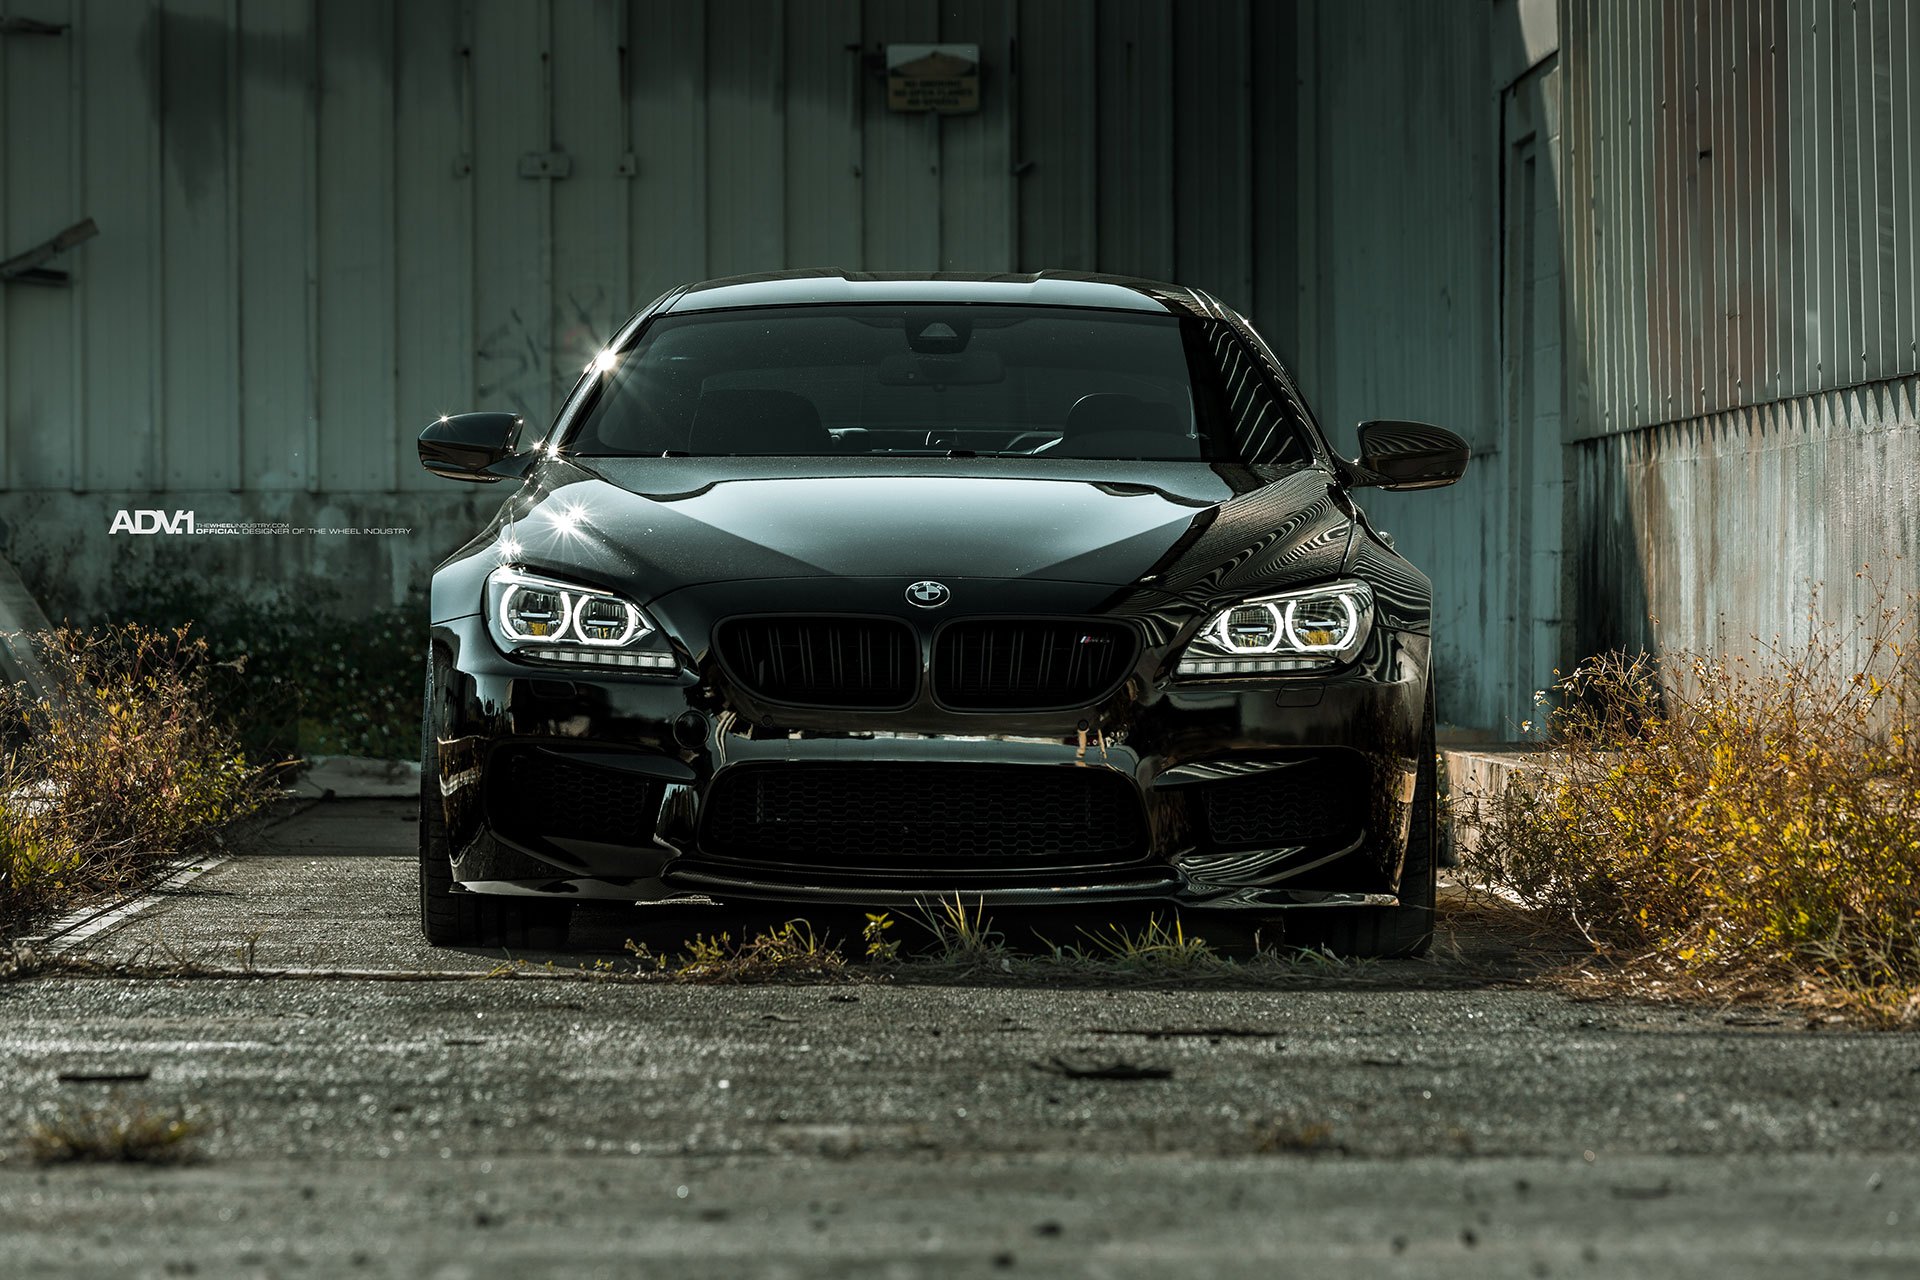 Sinister Looks Of Bmw M6 Gran Coupe With Purple Brakes And Black Rims Carid Com Gallery